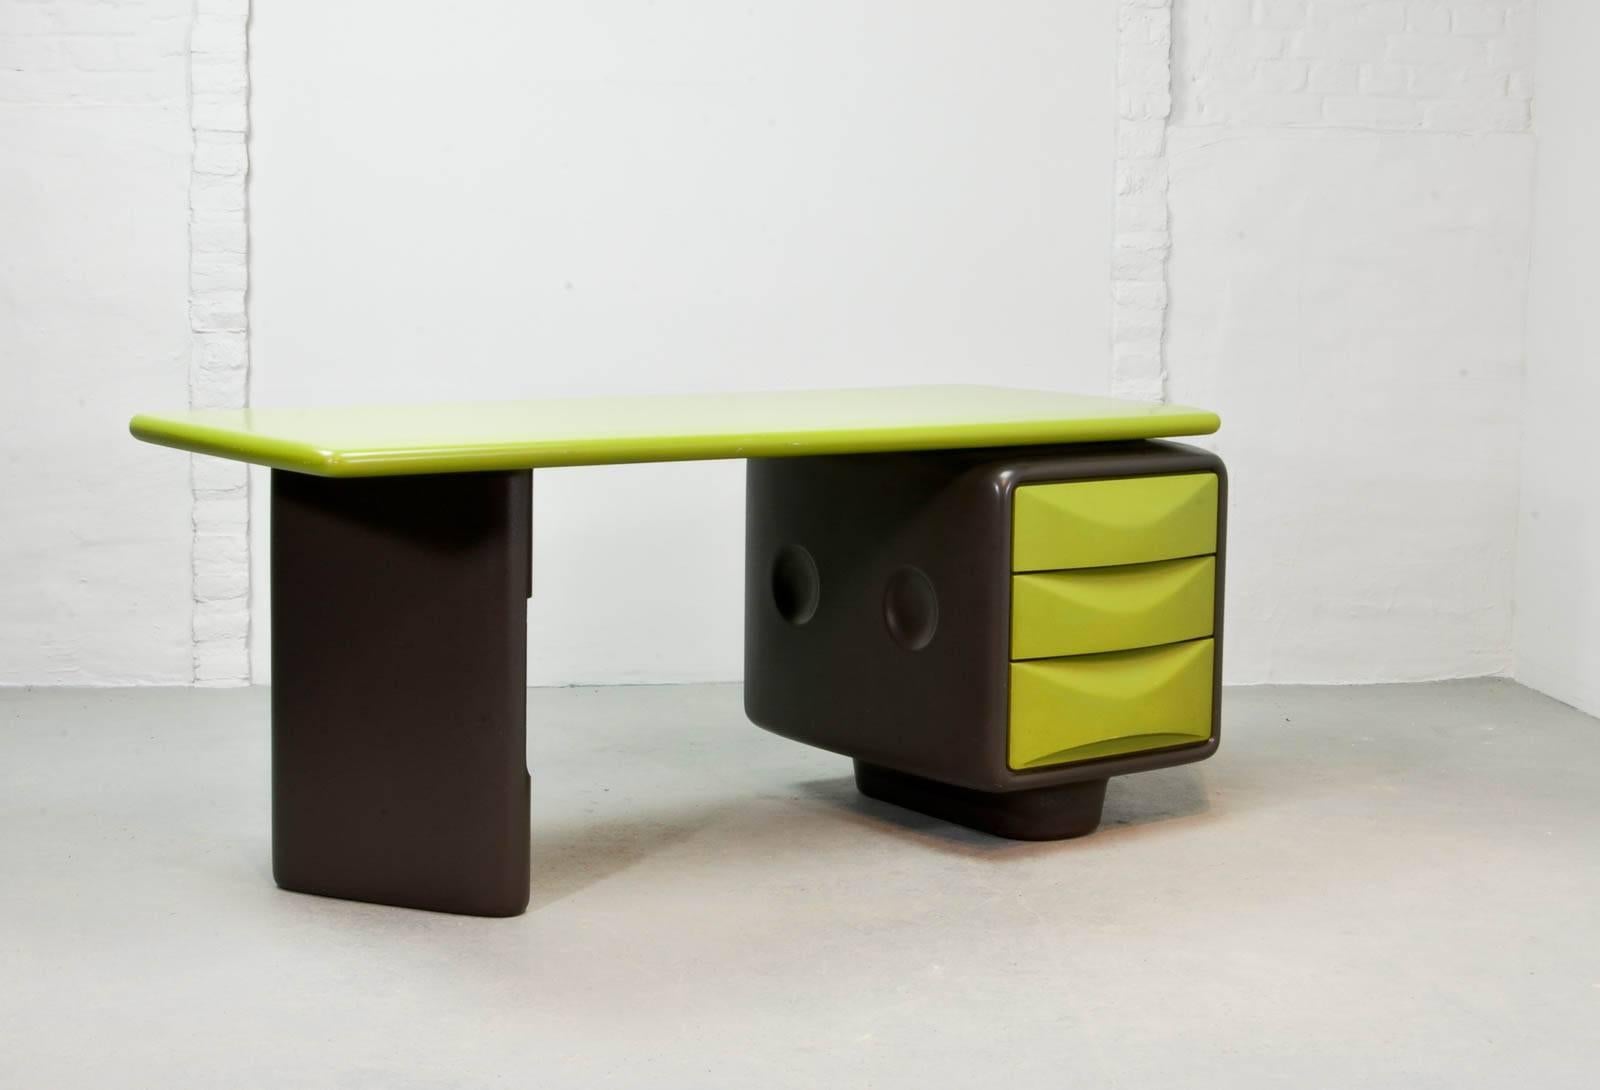 In 1970 the Czech modern designer Ernest Igl (born 1920) designed the Jet desk, which became a cult object collected along with Eames and Herman Miller pieces. 

The nice color combination of avocado green and chocolate brown is rarely seen. This